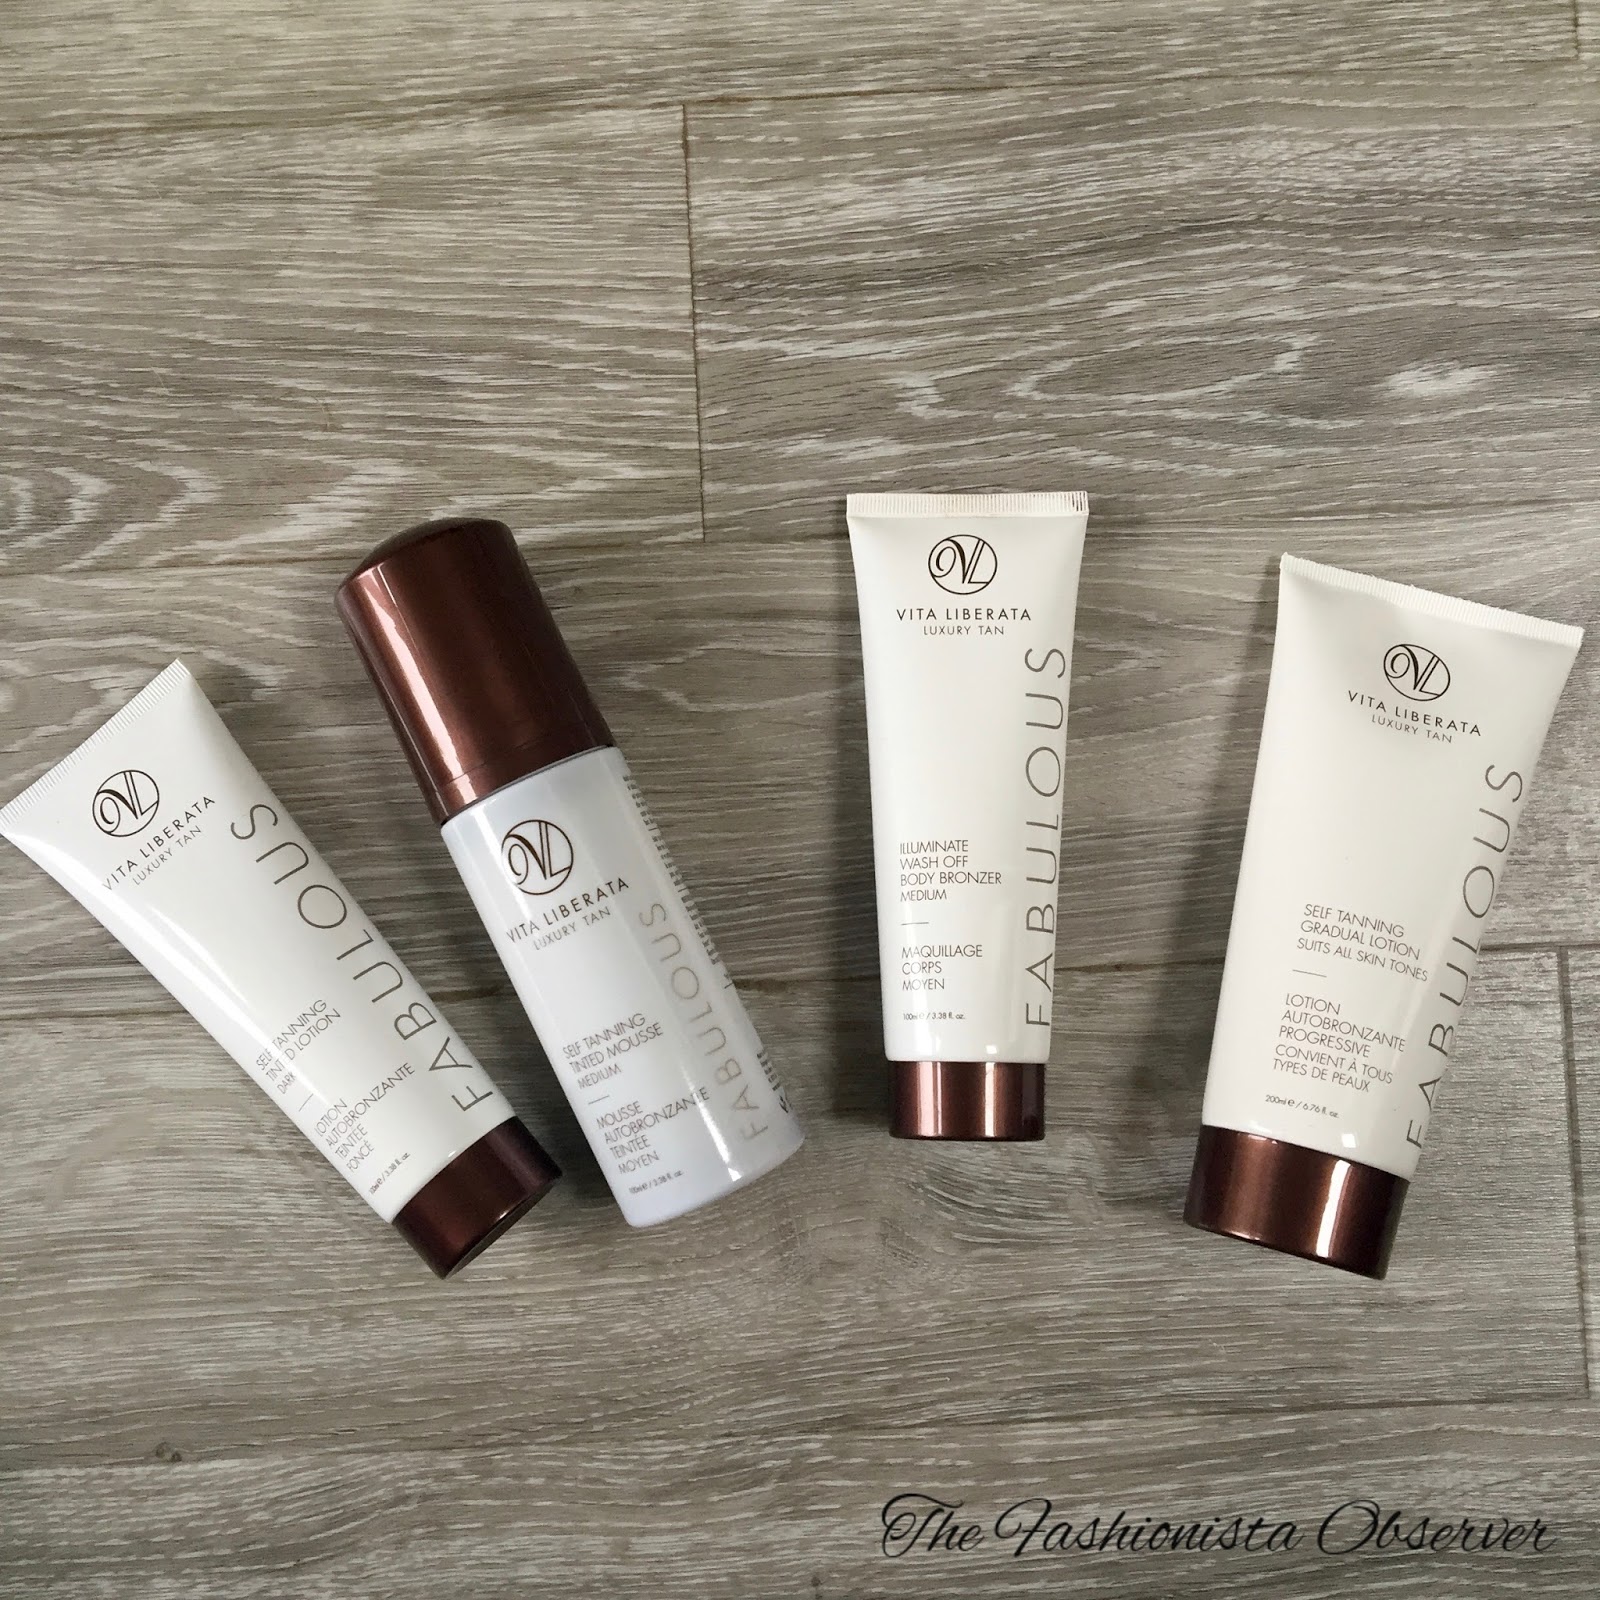 Forsømme Ung dame Kan Feel and Look Fabulous with Vita Liberata - The Fashionista Observer